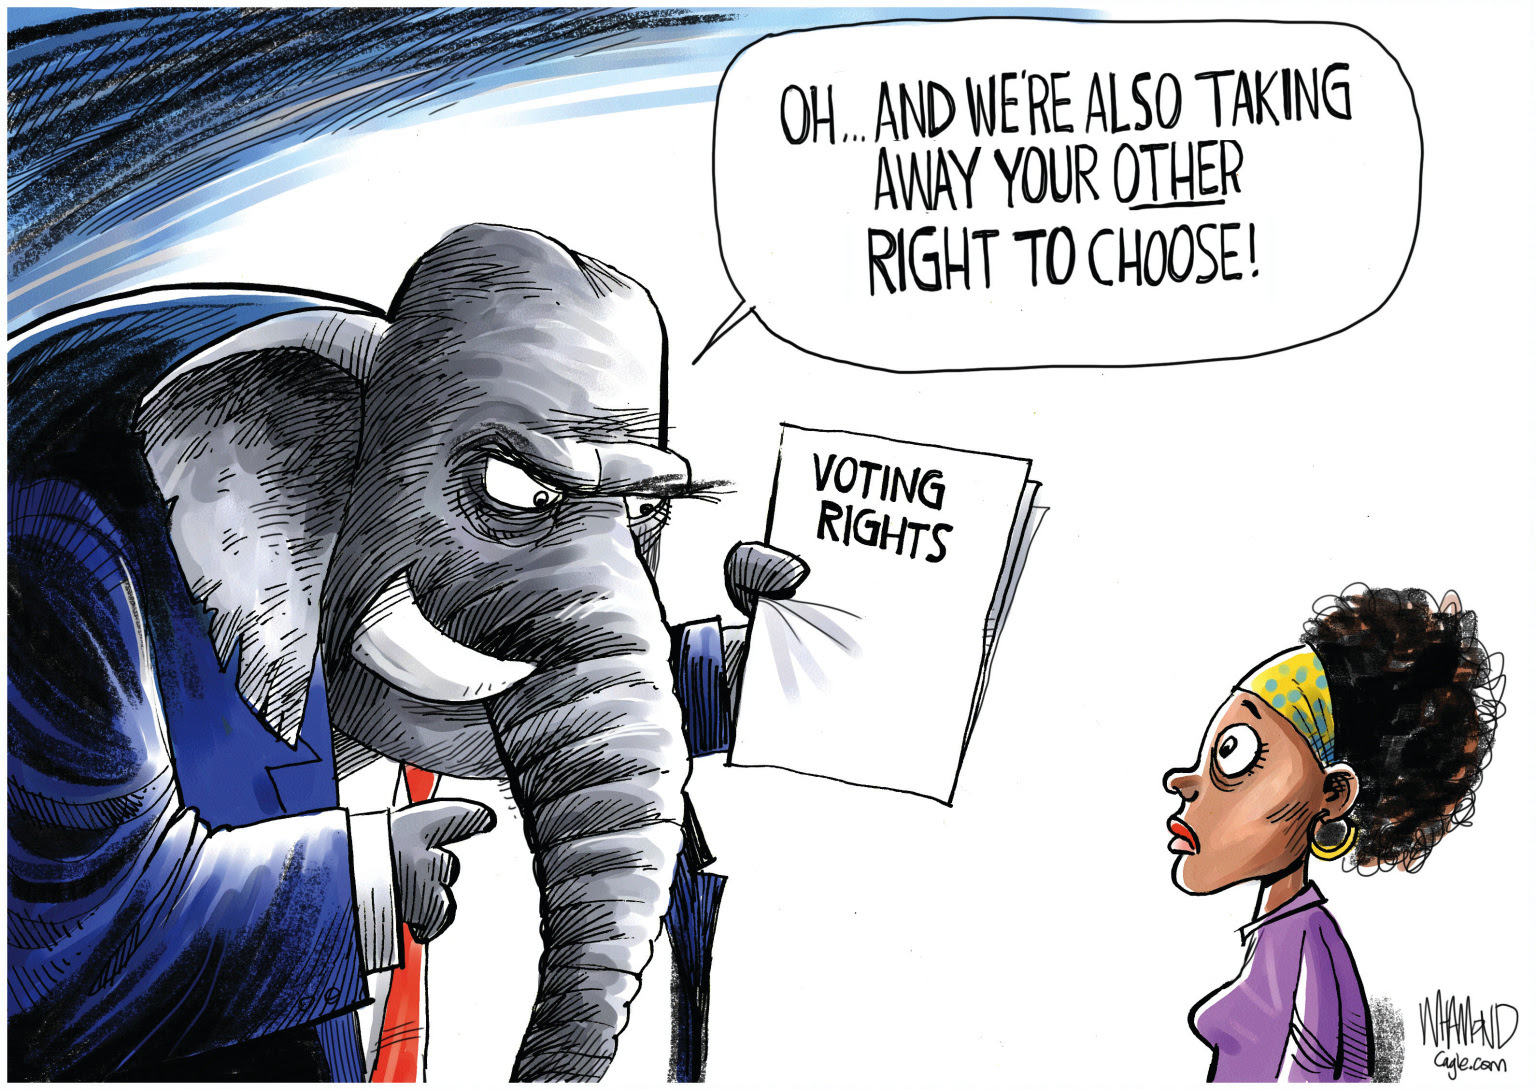 Republicans deny women the right to choose and their voting rights